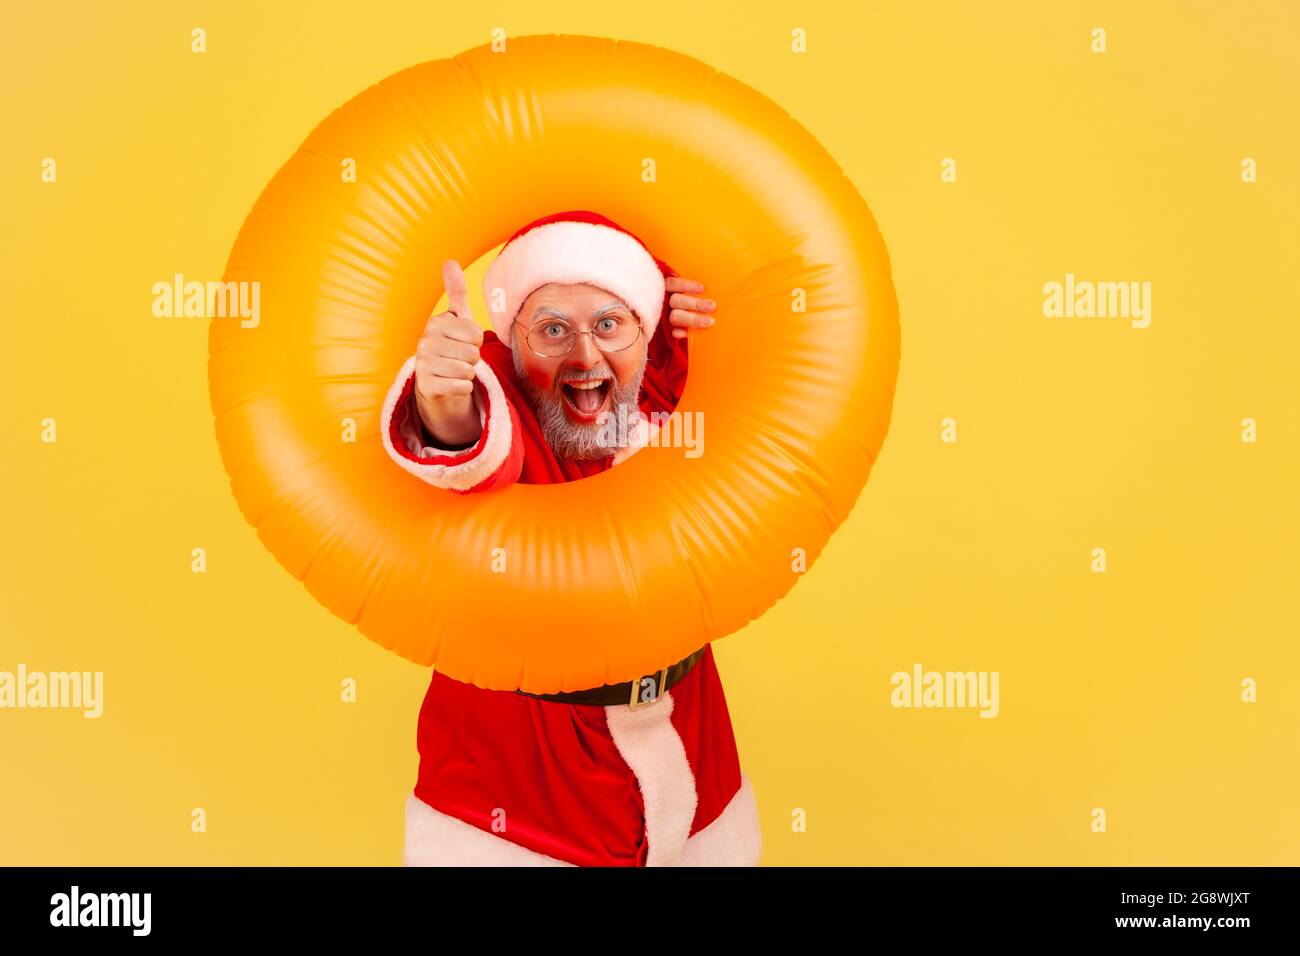 Extremely happy elderly man with gray beard wearing santa claus costume posing with orange rubber ring and showing thumb up, enjoying winter vacation. Stock Photo